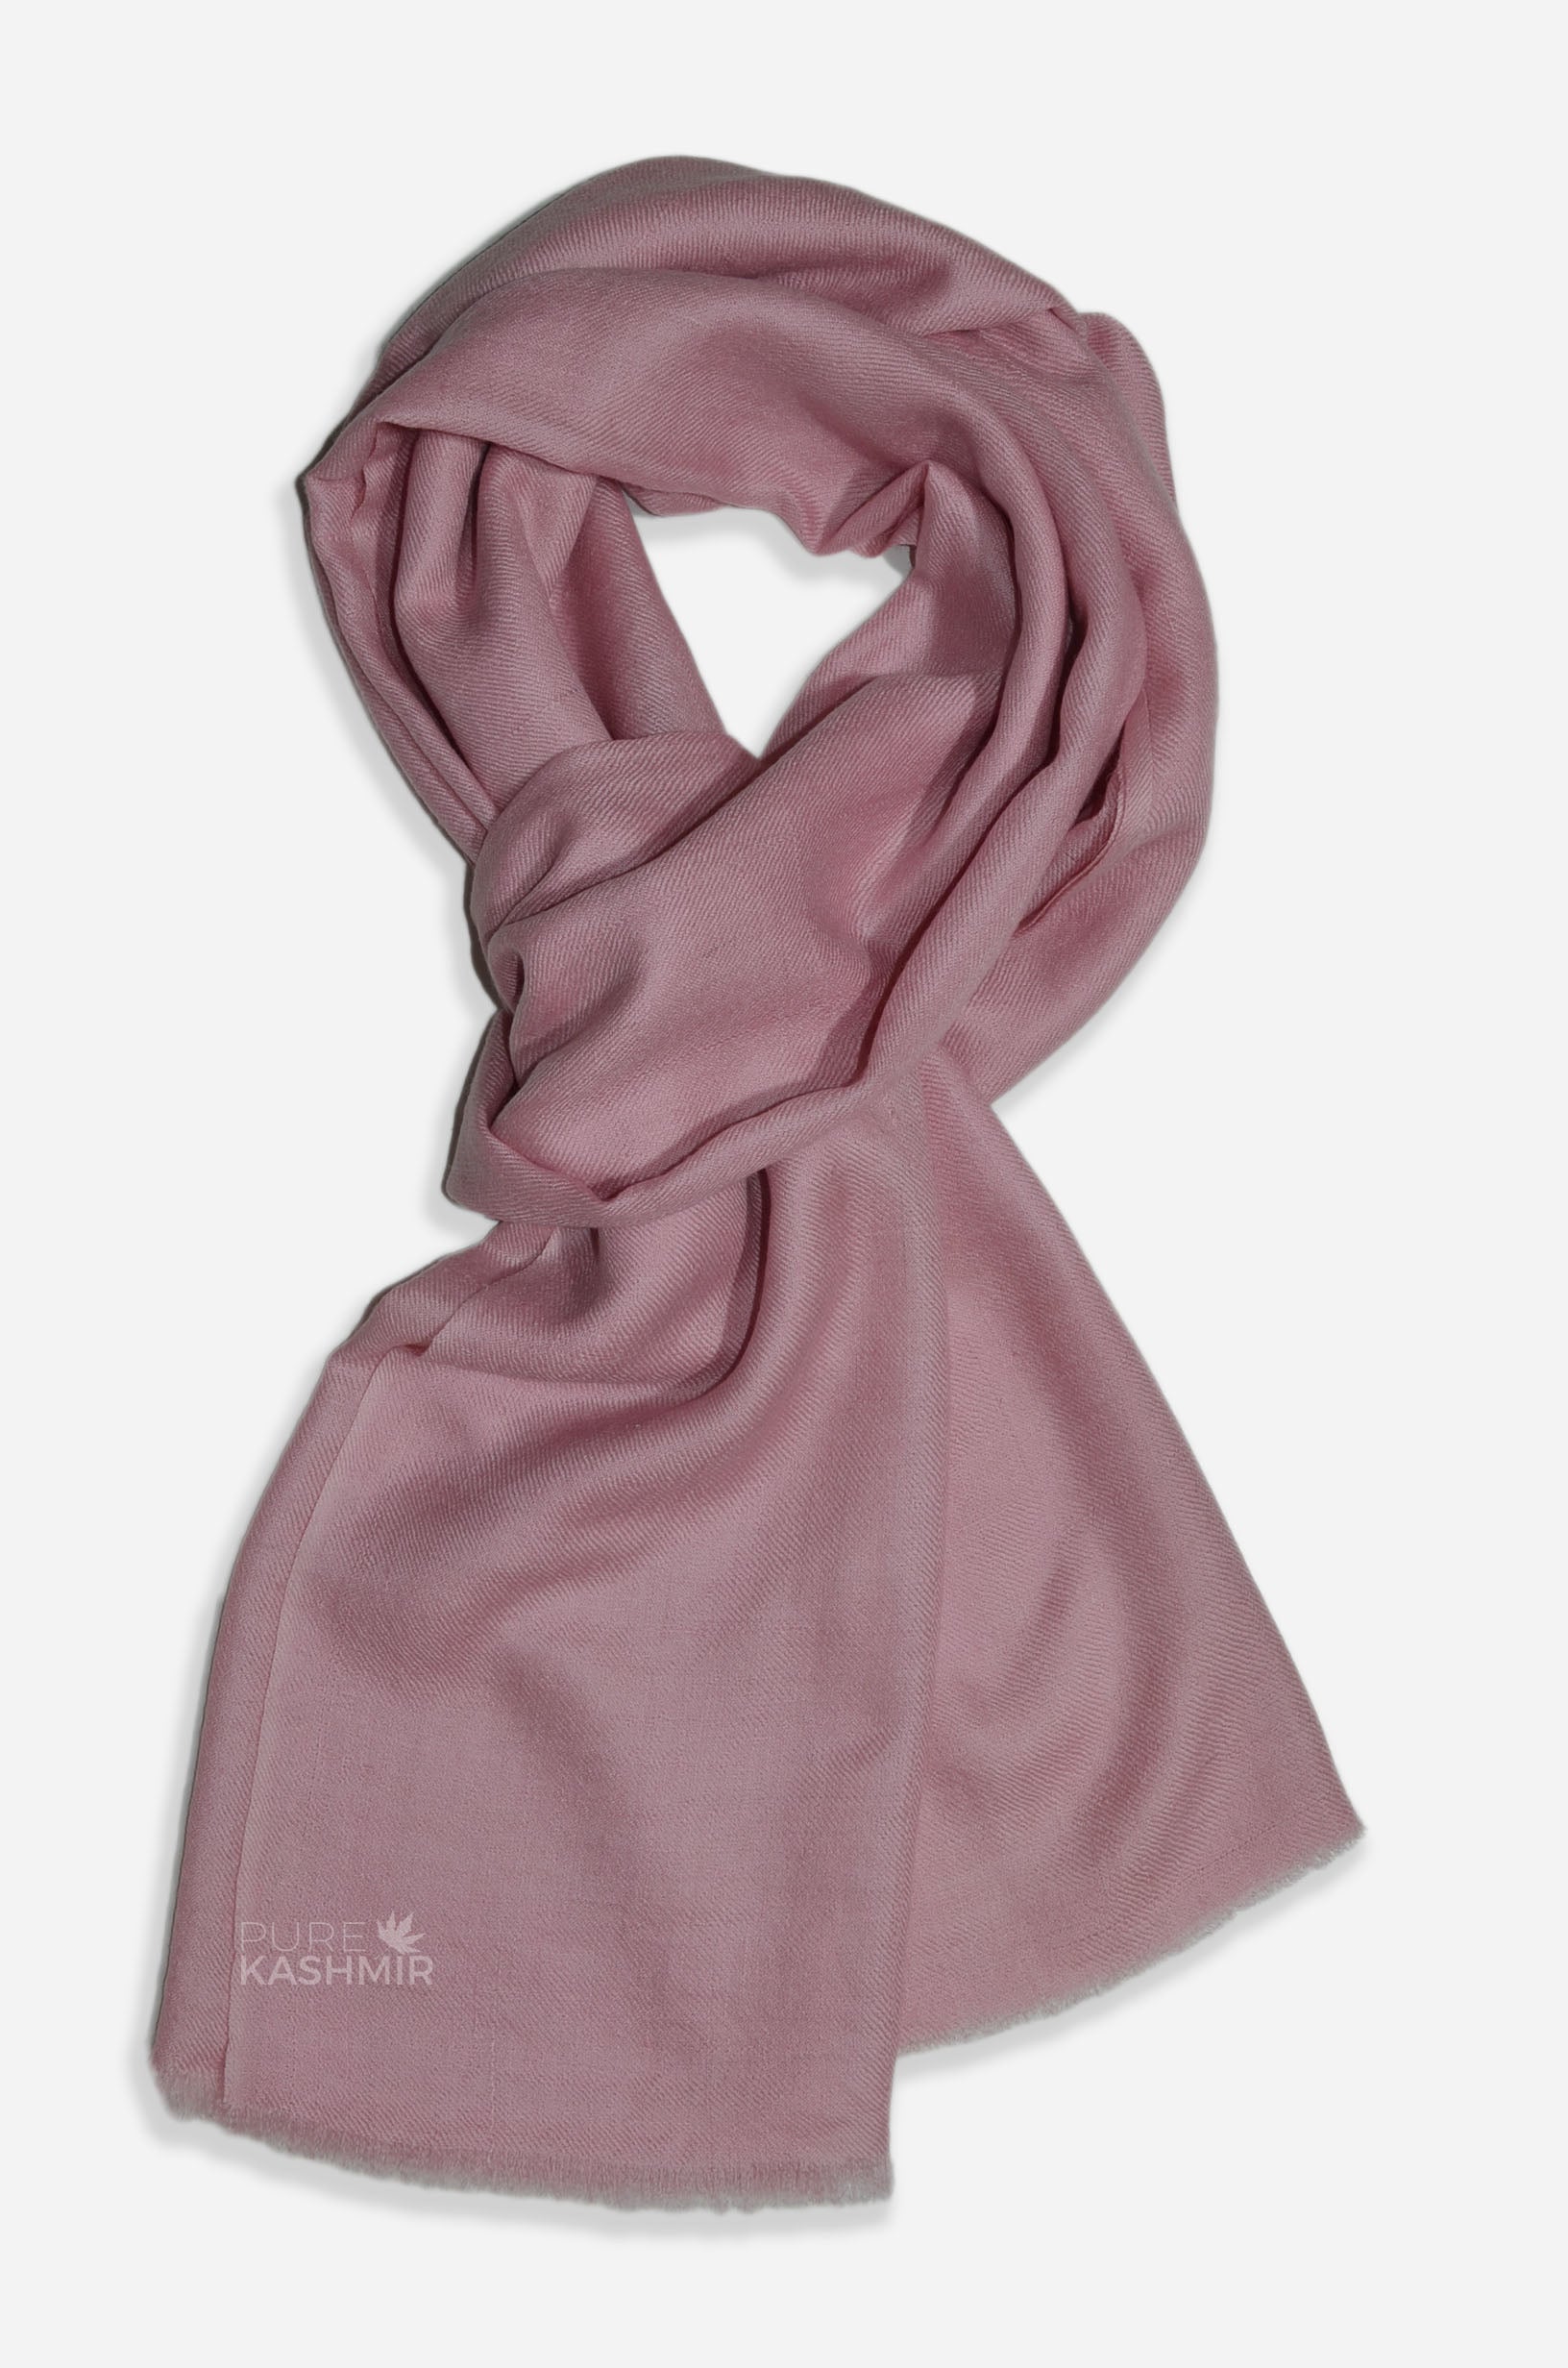 Buy Authentic Baby Pink Pashmina Shawl - 100% Cashmere Online